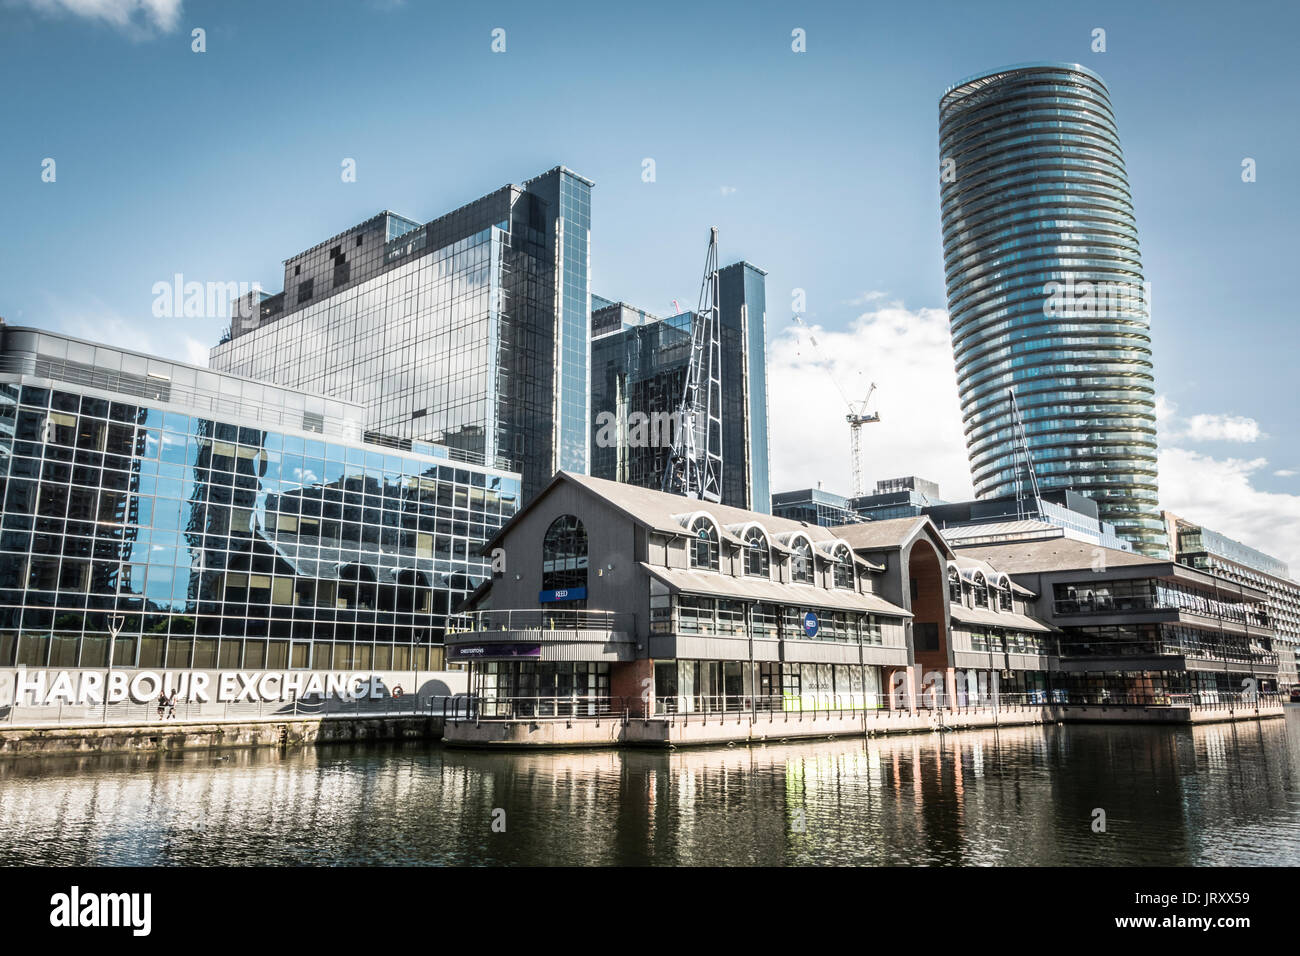 London, England, UK: The Harbour Exchange commercial development on the Isle of Dogs, London, E14. Stock Photo